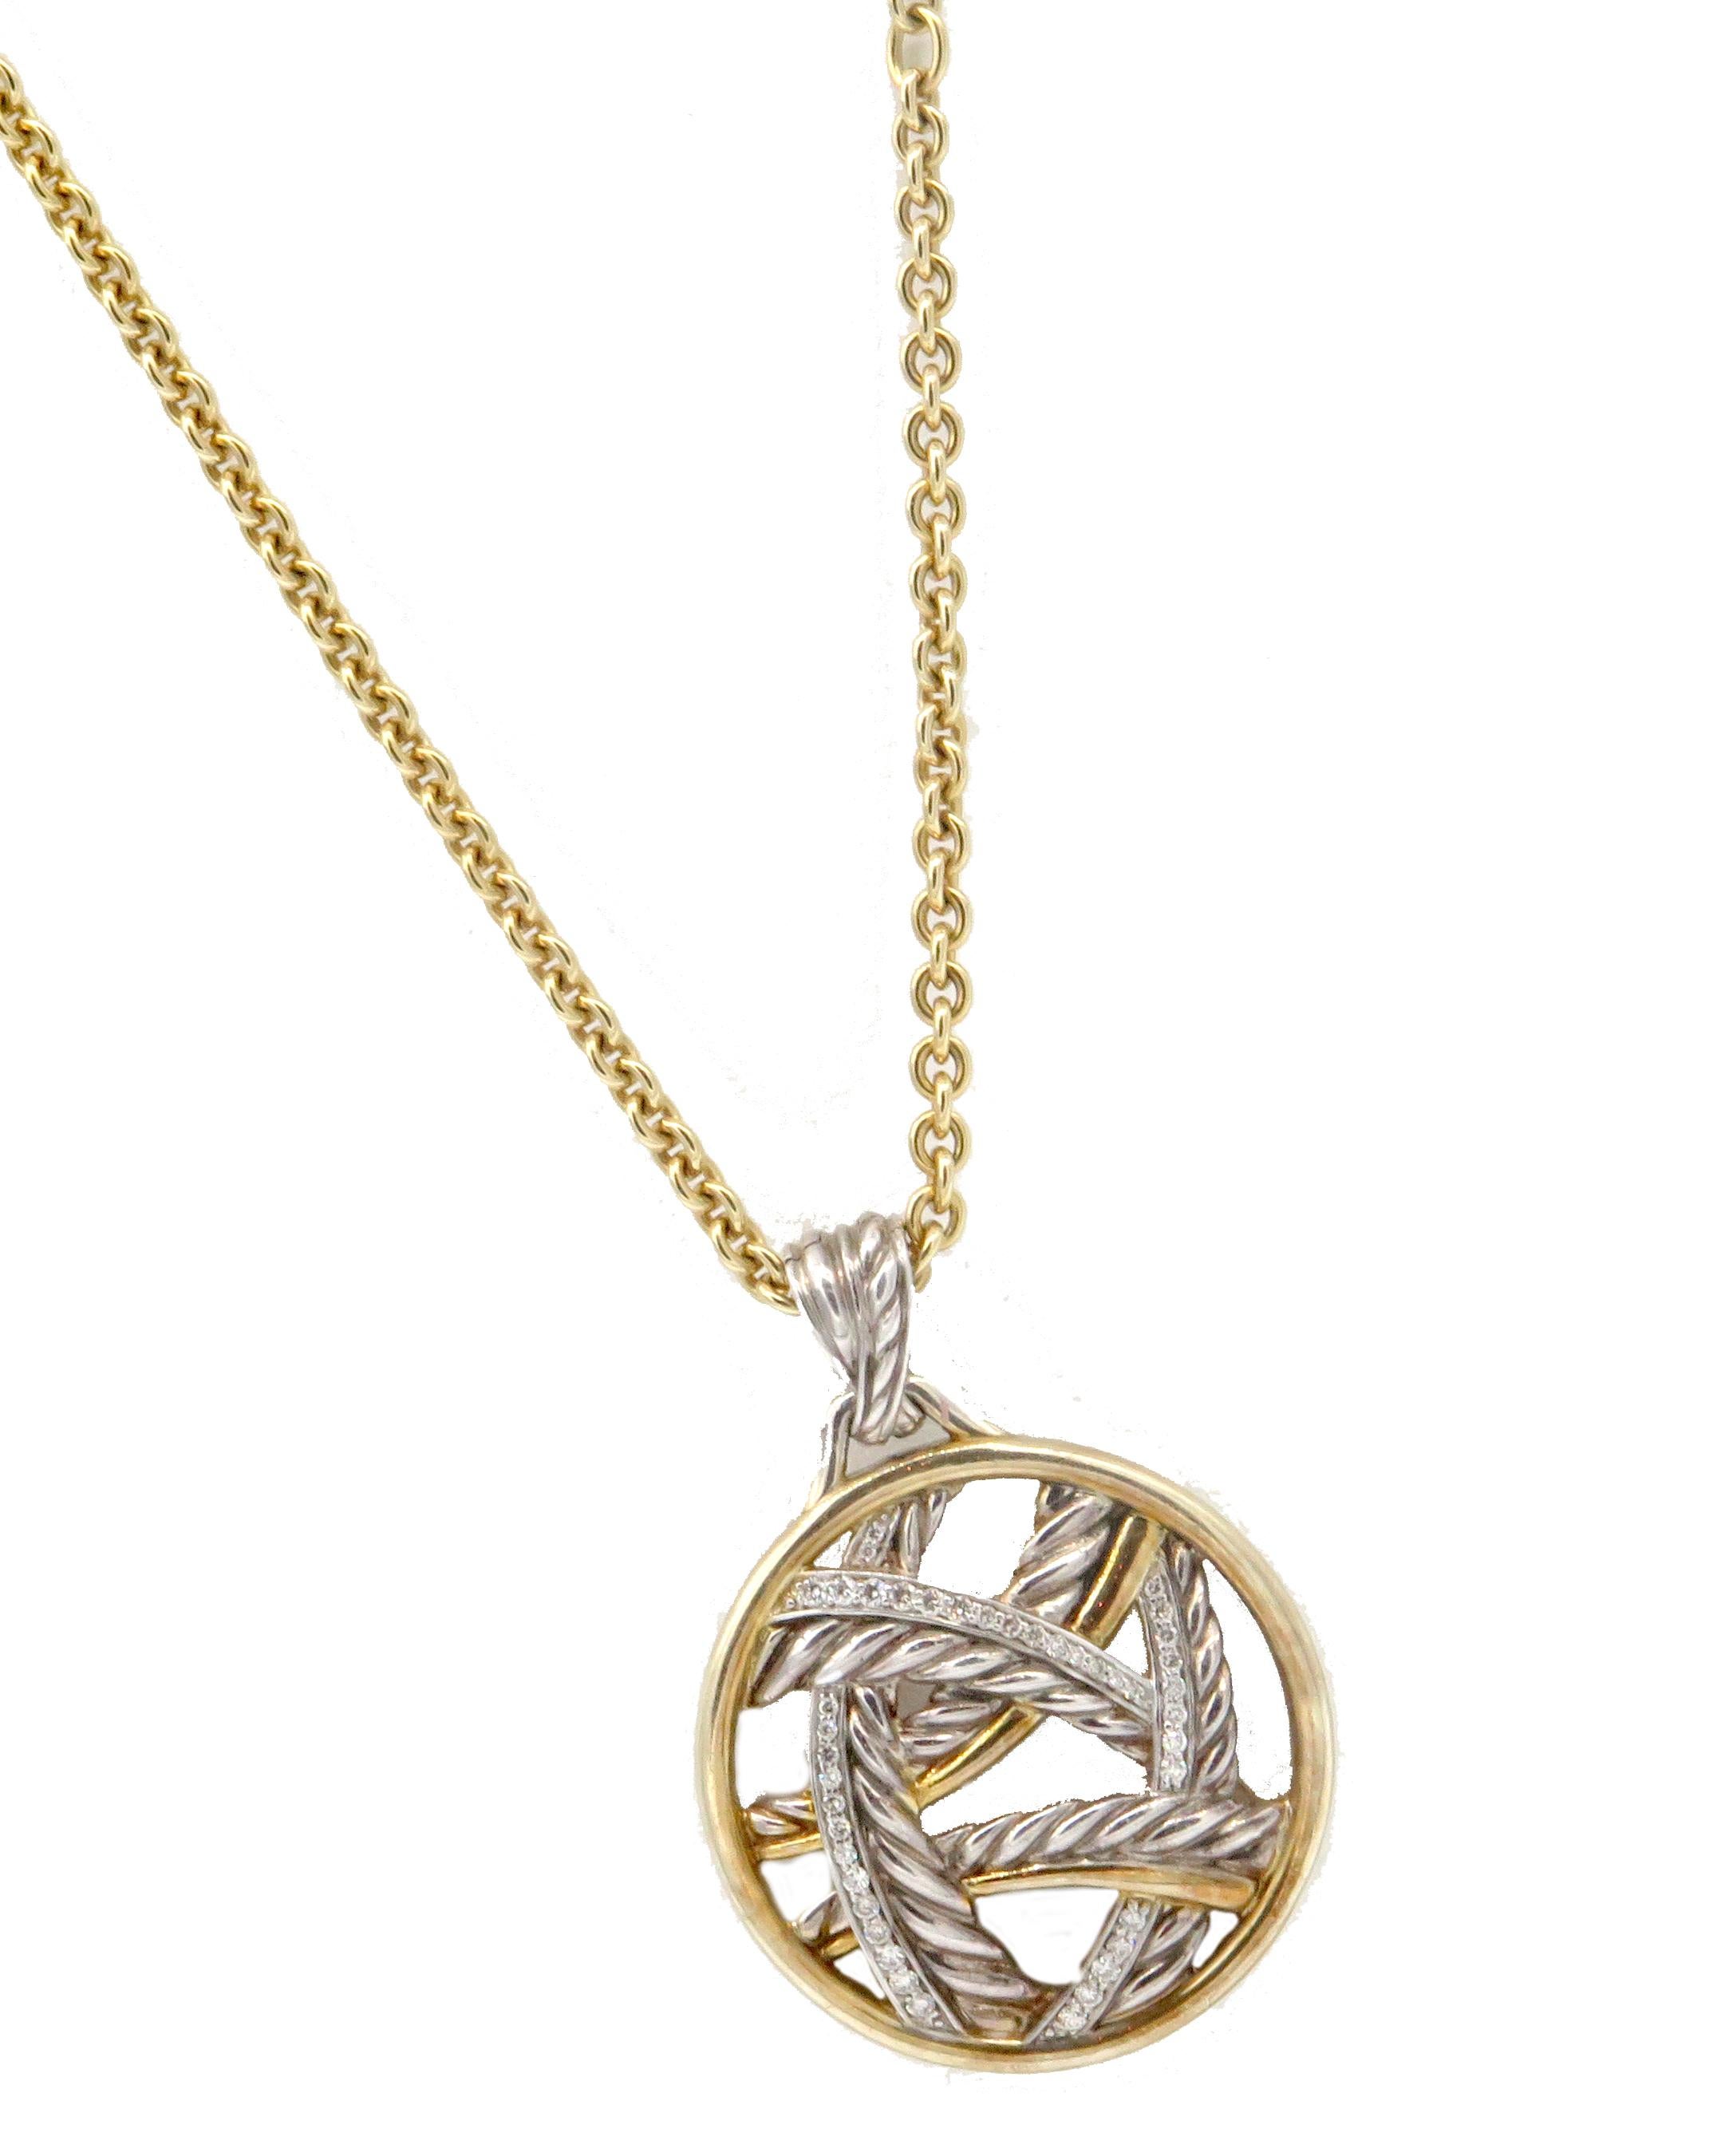 A beautiful round pendant by David Yurman, Signed on the back. This gorgeous pendent comes from the Papyrus Collection. This particular pendant comes with diamonds and is 925 Sterling Silver with gold accents. The pendant weighs 27.87 grams and is